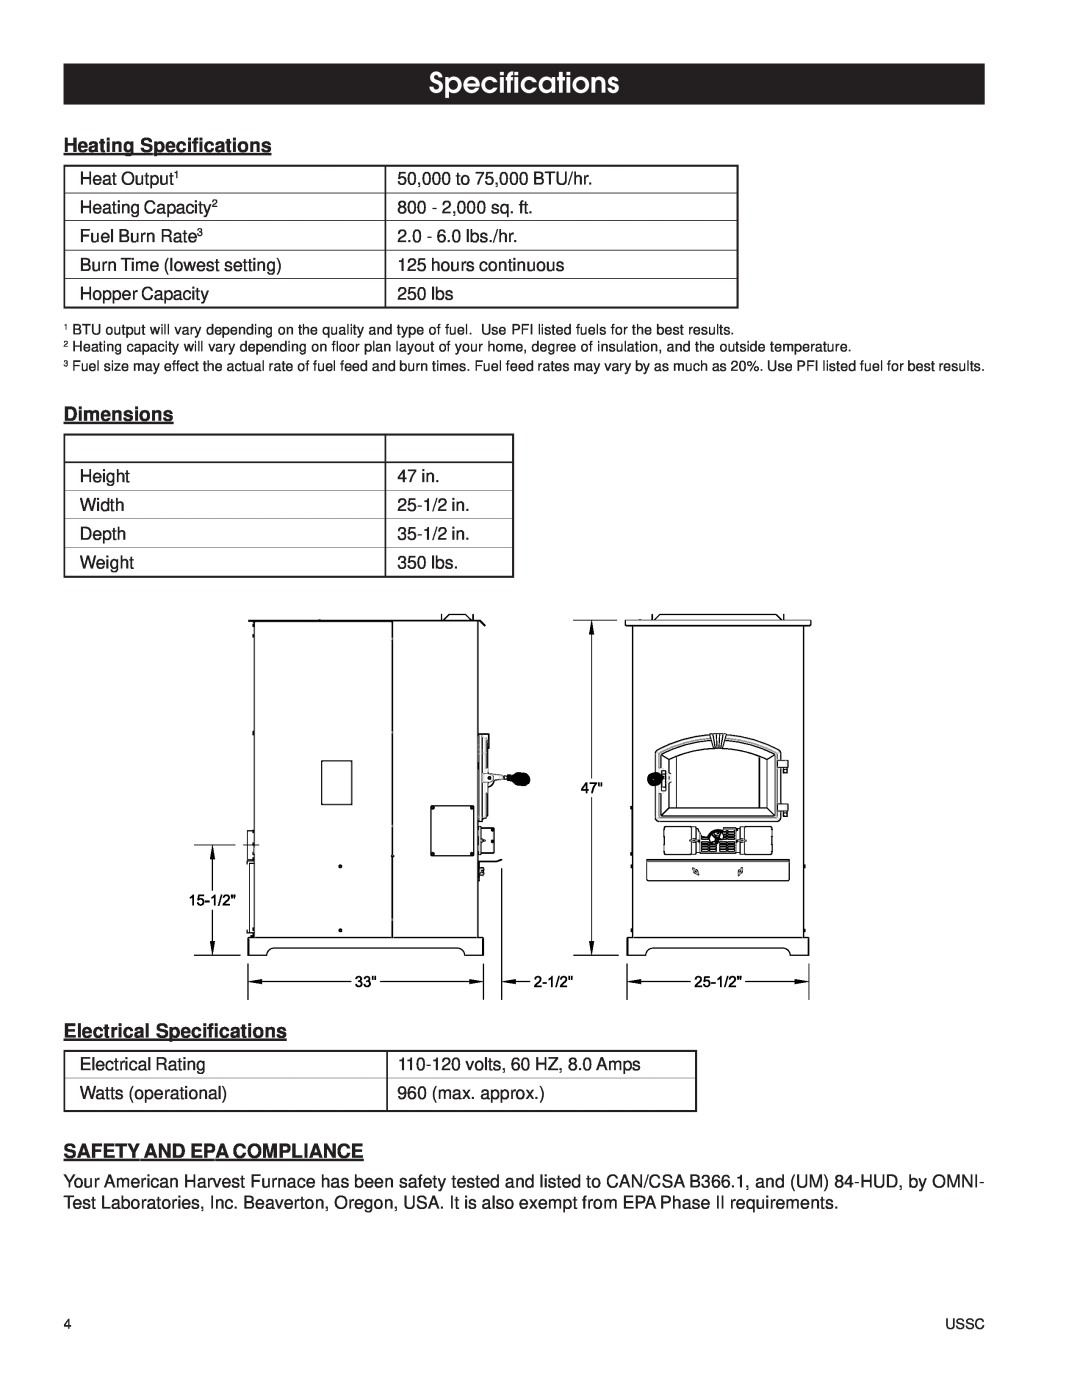 United States Stove 6100 Heating Specifications, Dimensions, Electrical Specifications, Safety And Epa Compliance 